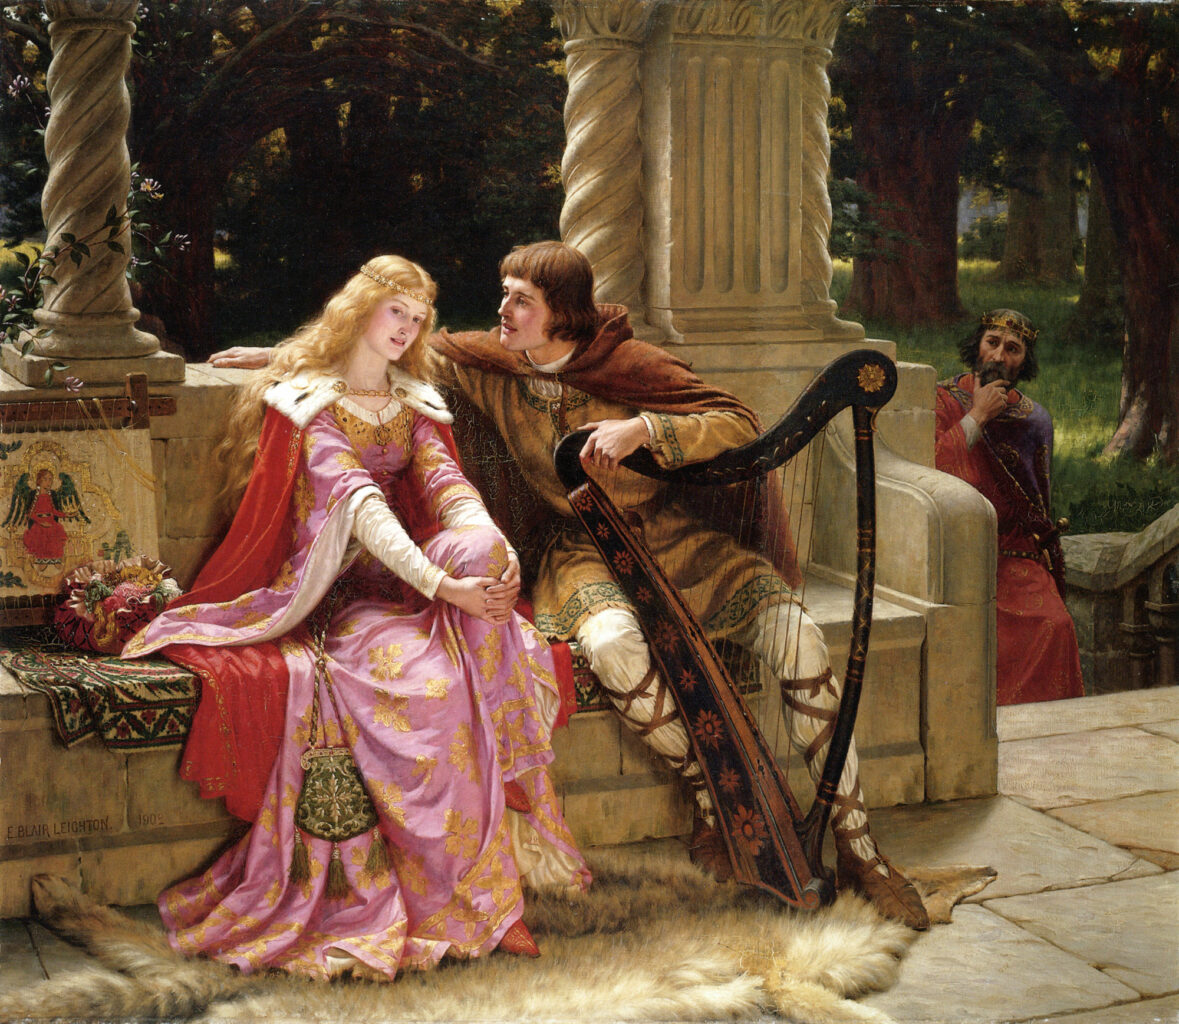 Painting of a woman in medieval dress being spoken to by a man with a harp, sitting on a marble bench outdoors as an older man approaches. 